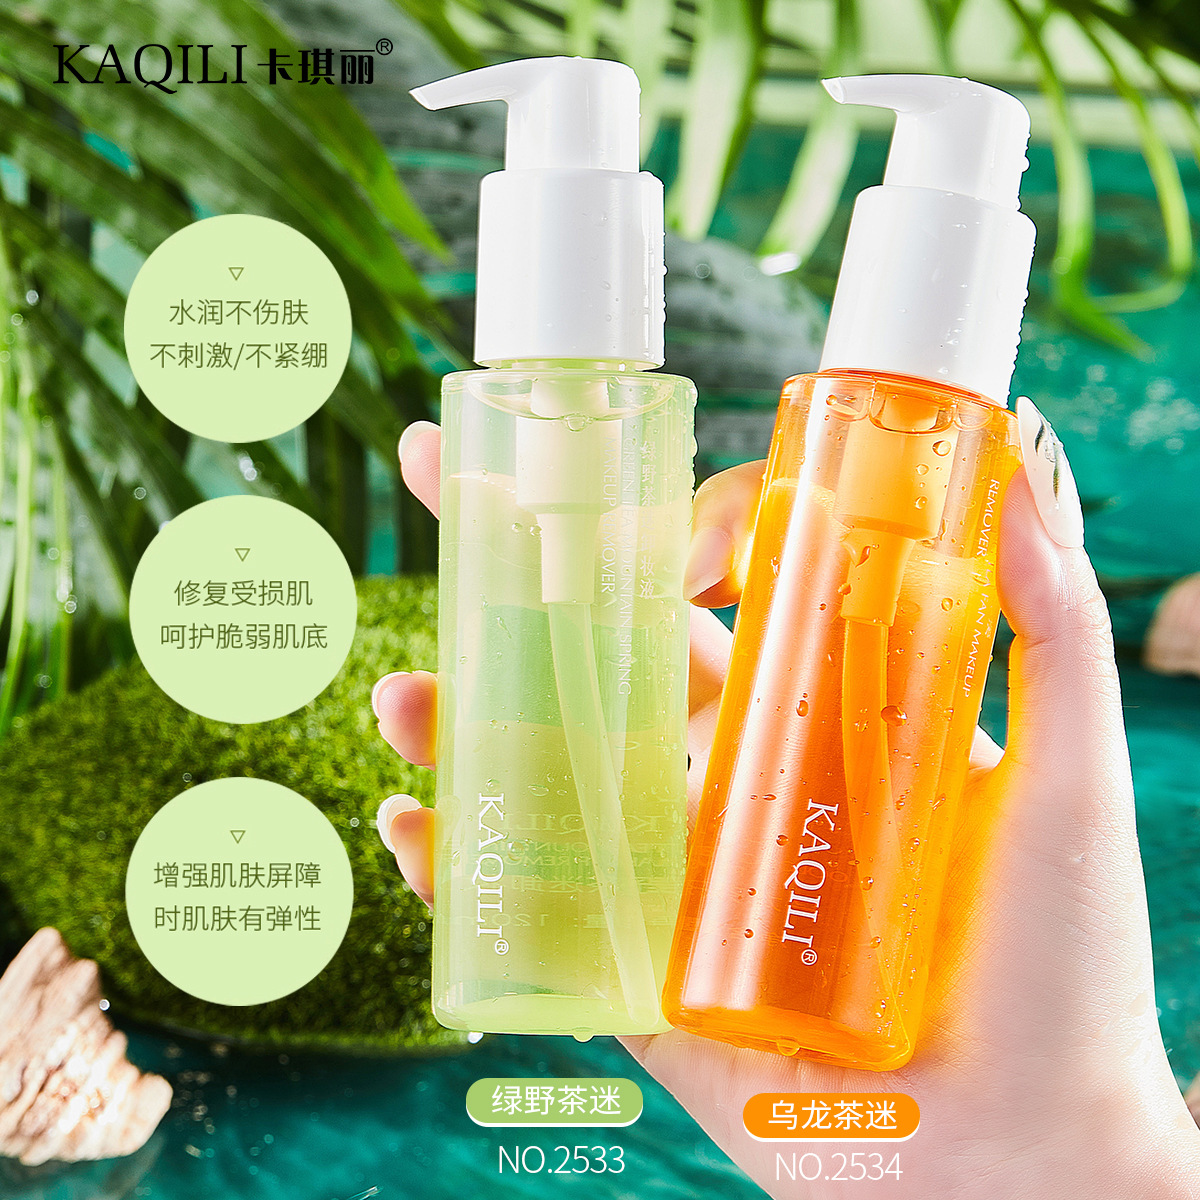 Manufactor wholesale Botany Essence Cleansing Water Moderate stimulate deep level clean Sensitive skin and flesh available face Remove makeup